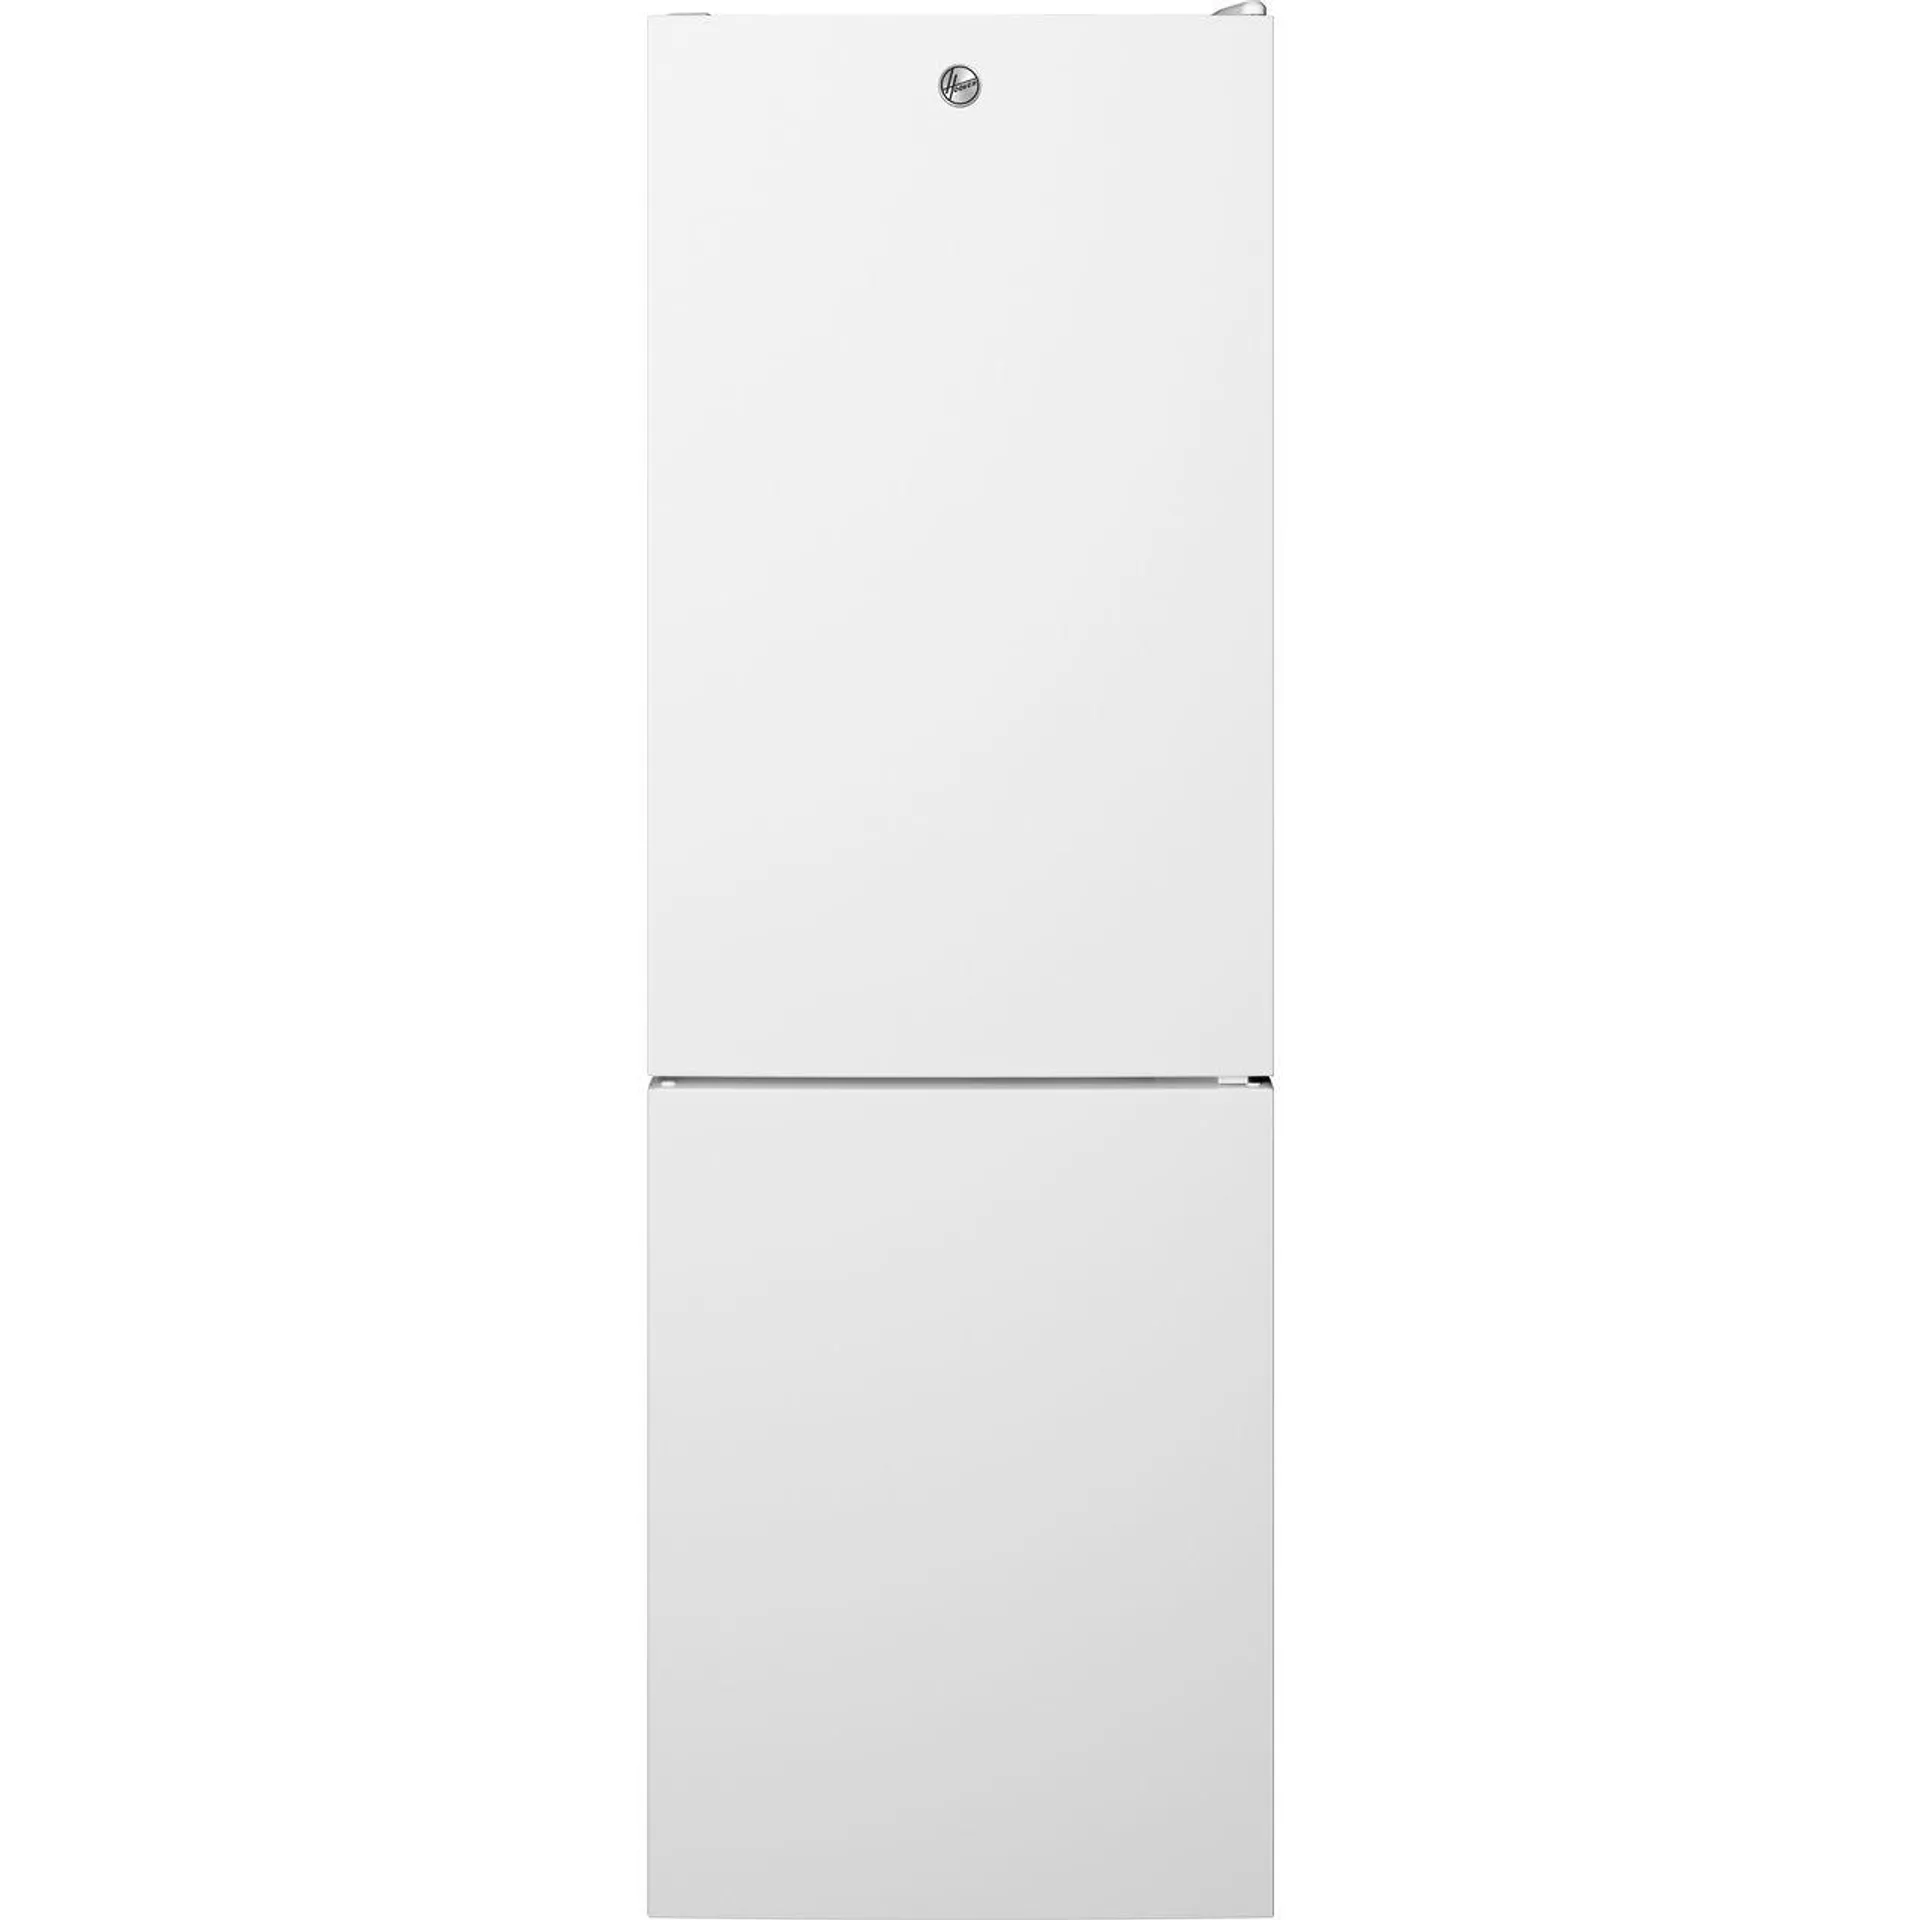 Hoover HOCE3T618FWK 60/40 Total No Frost Fridge Freezer - White - F Rated